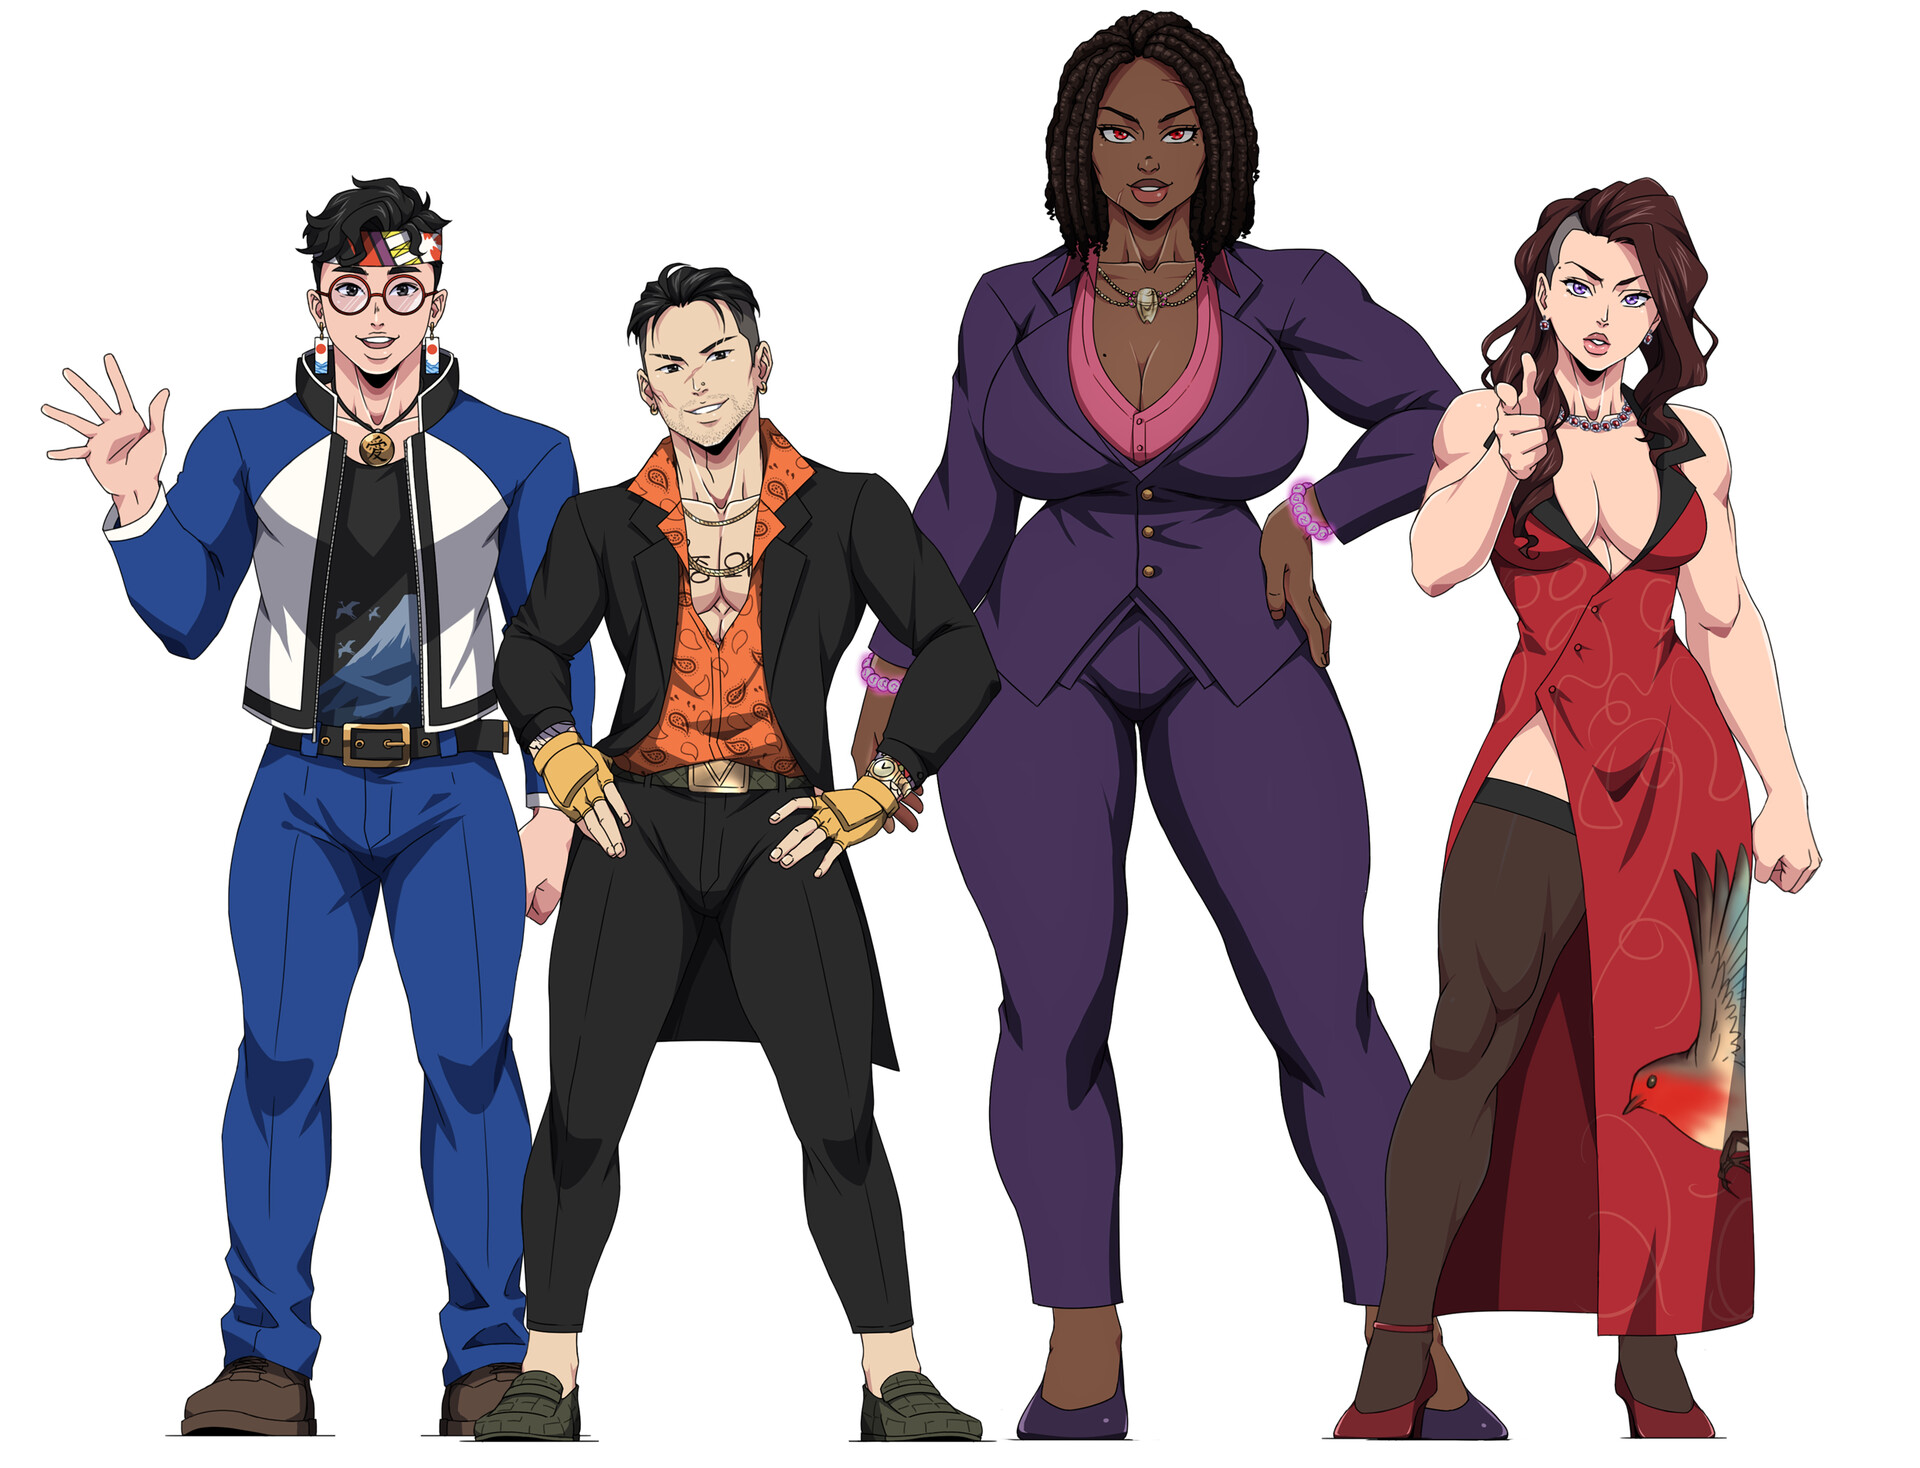 Forevermore & Nevermore Cast - Anime Style, Damaris Franks II.